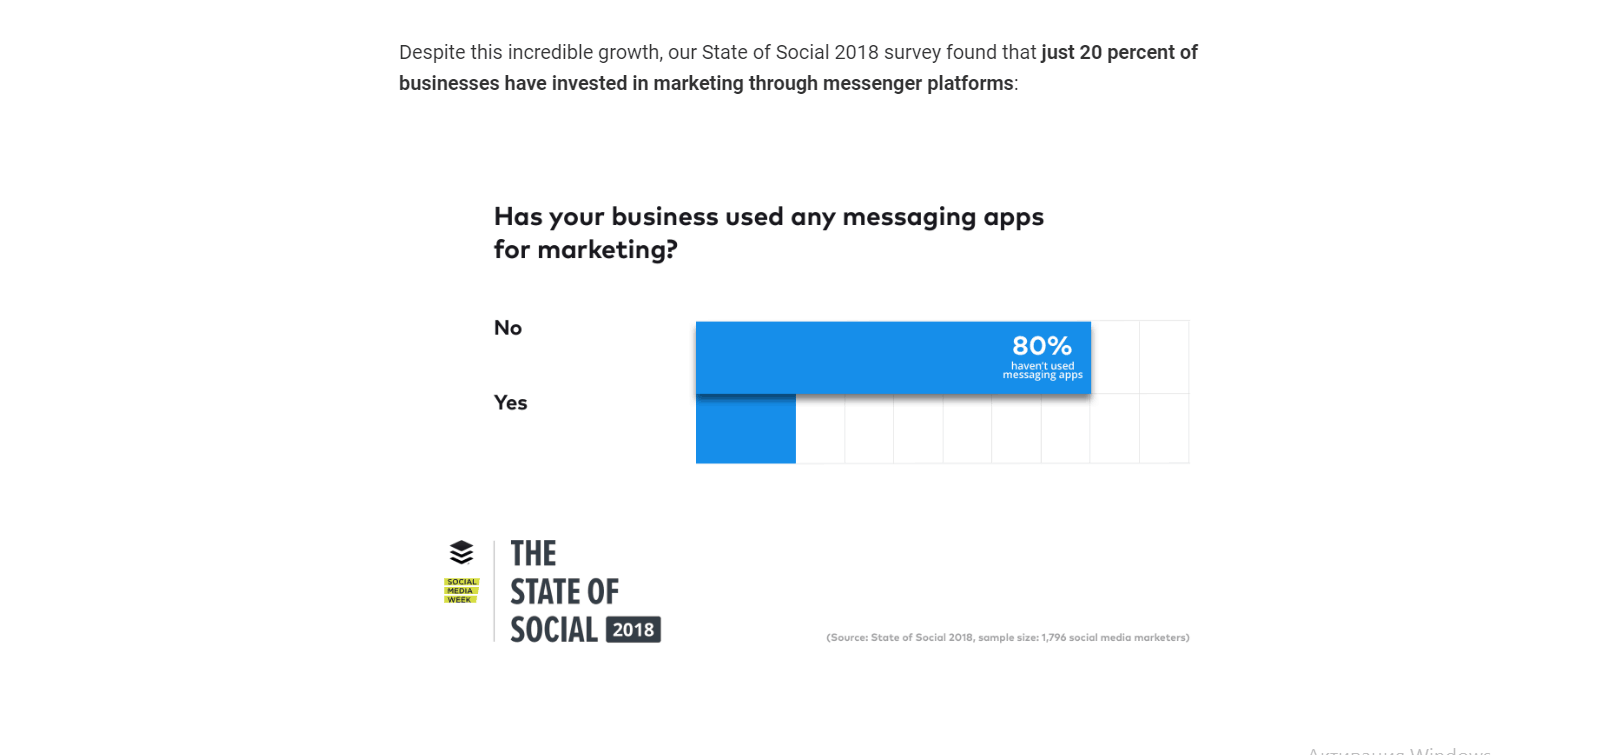 just 20% of businesses have invested in marketing messenger platforms